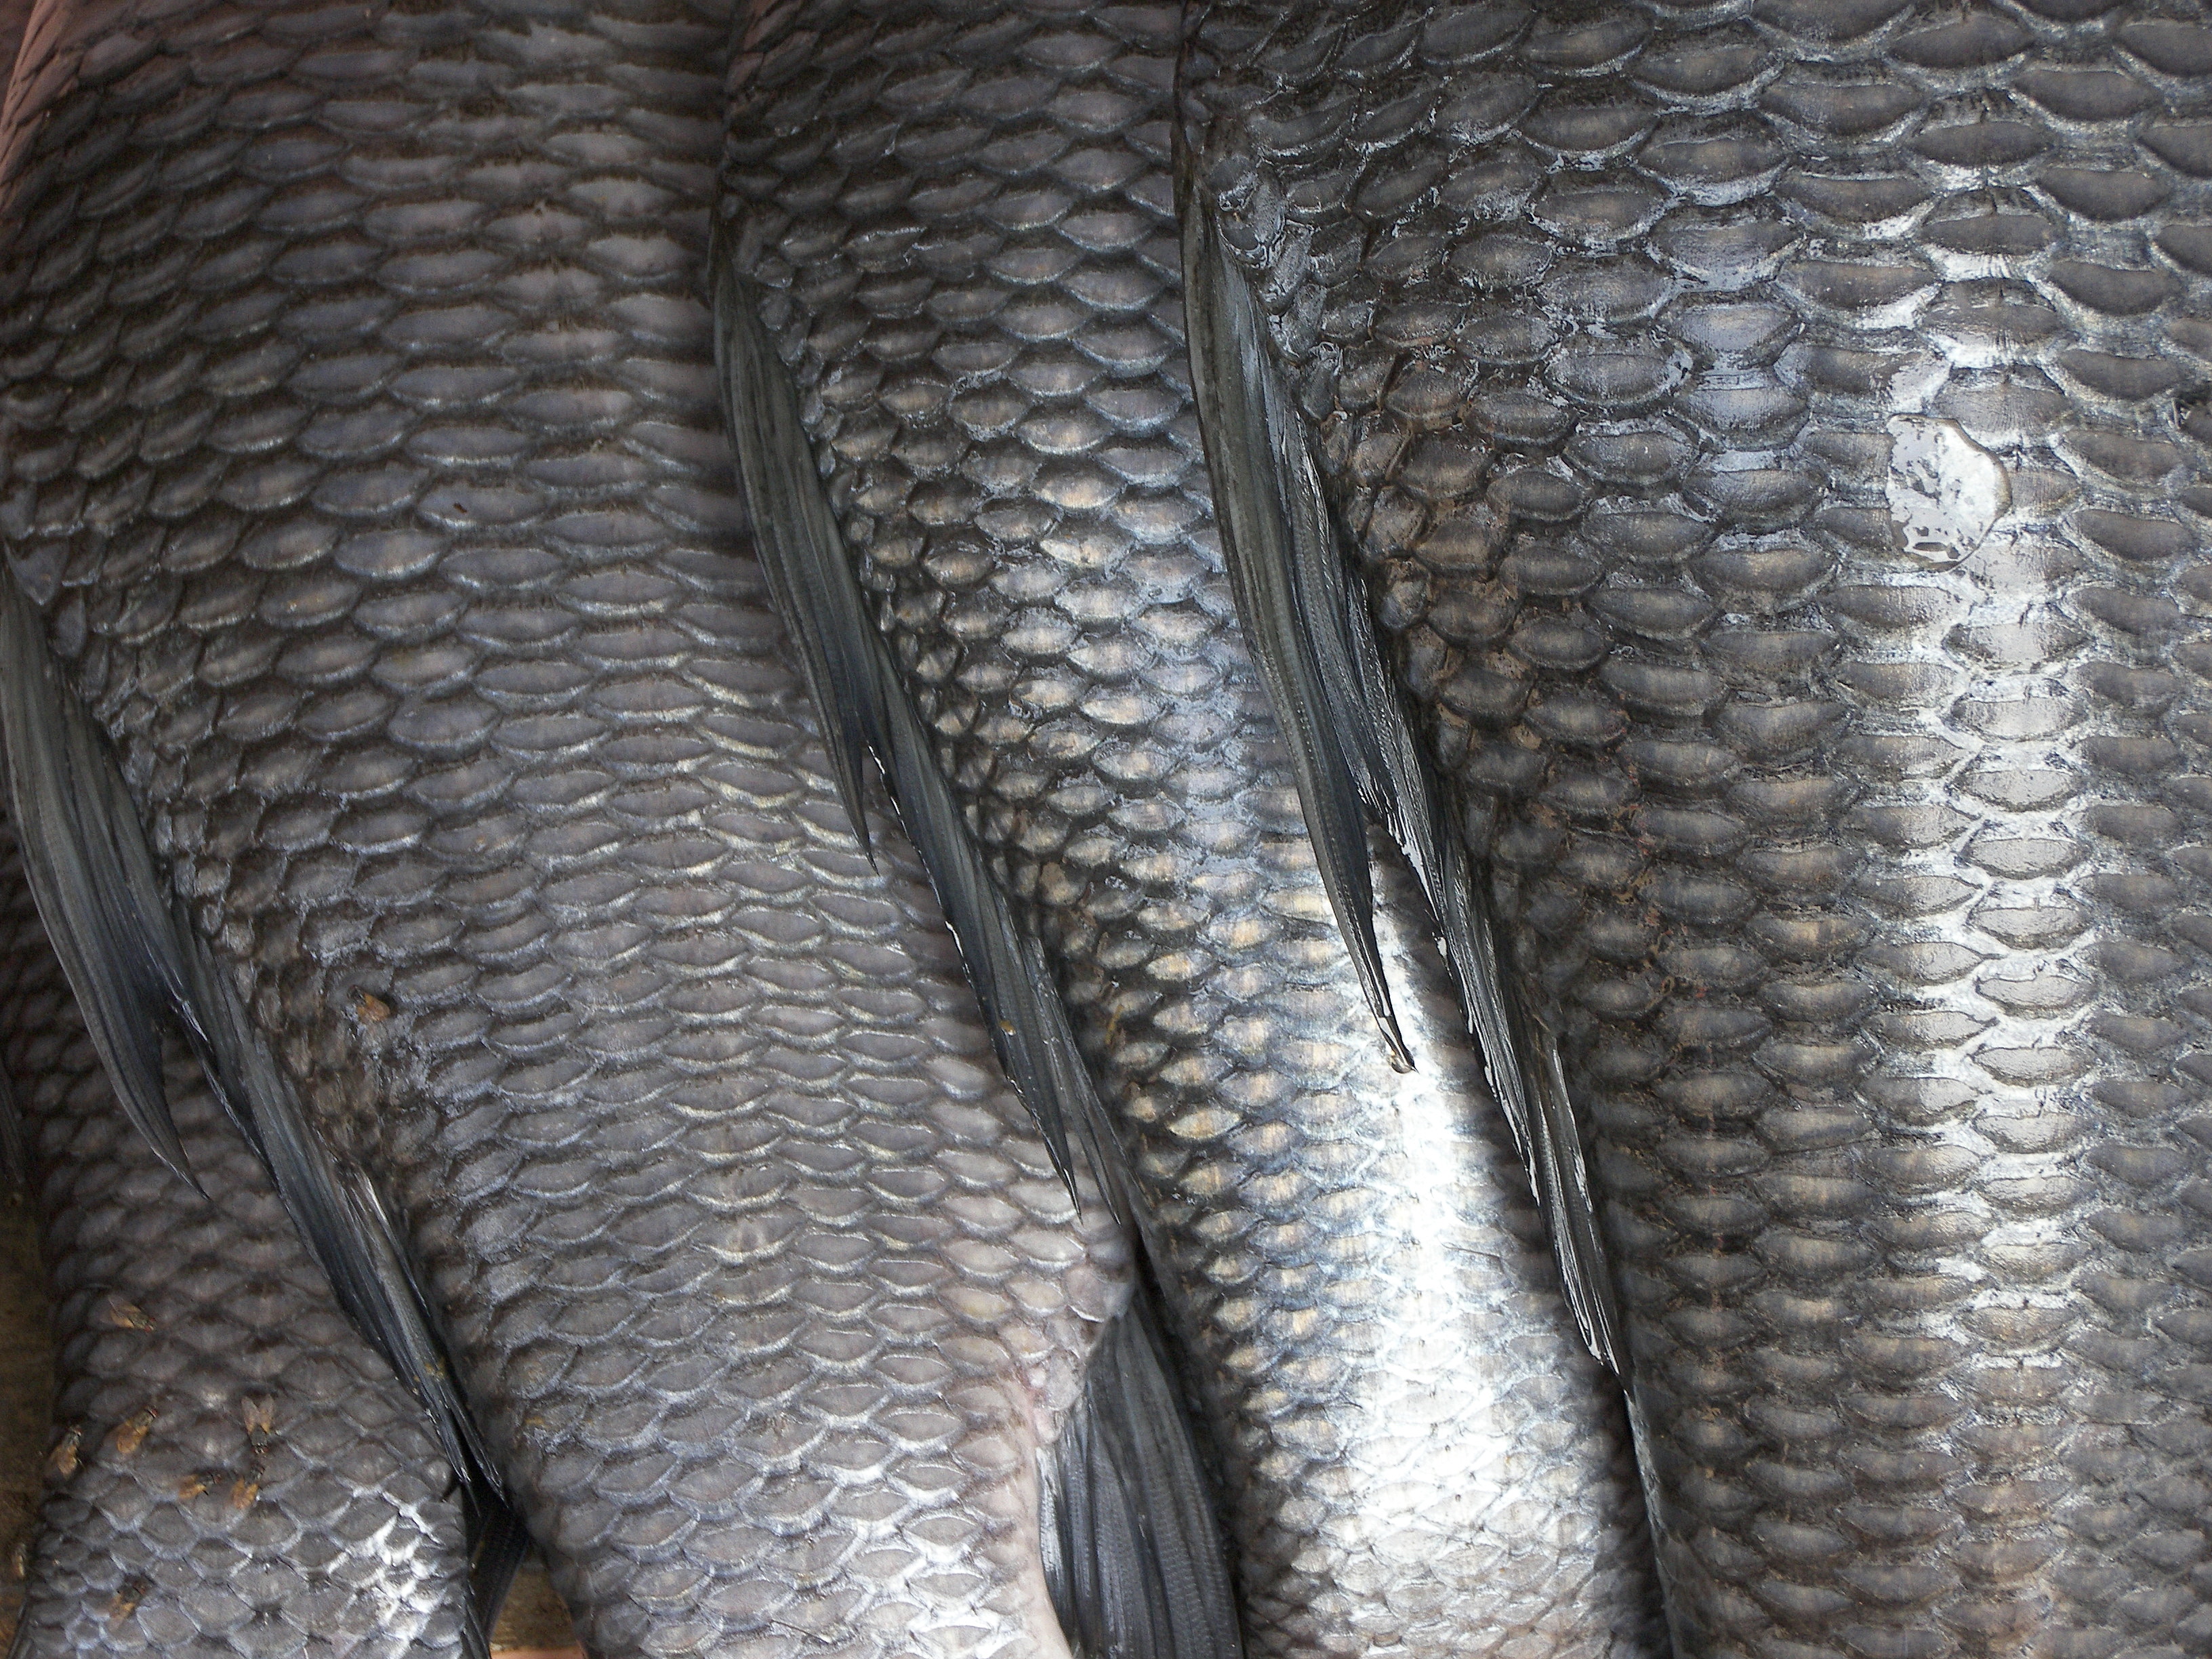 Fish And Scales